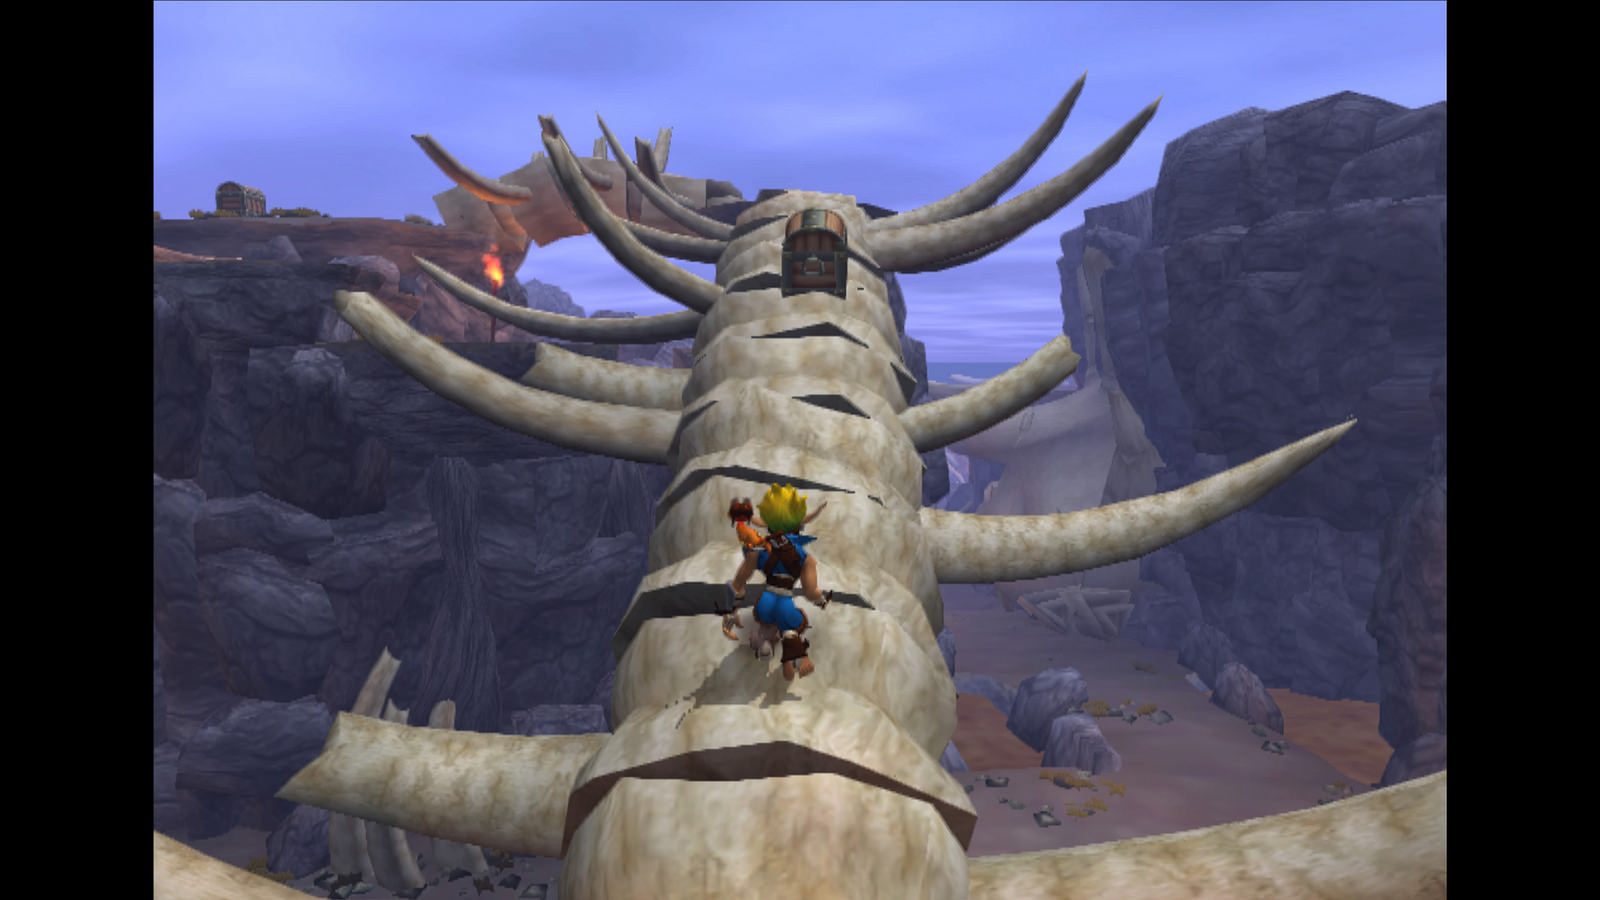 jak-and-daxter-ps2-classics-coming-to-ps4-later-this-year-playstation-blog